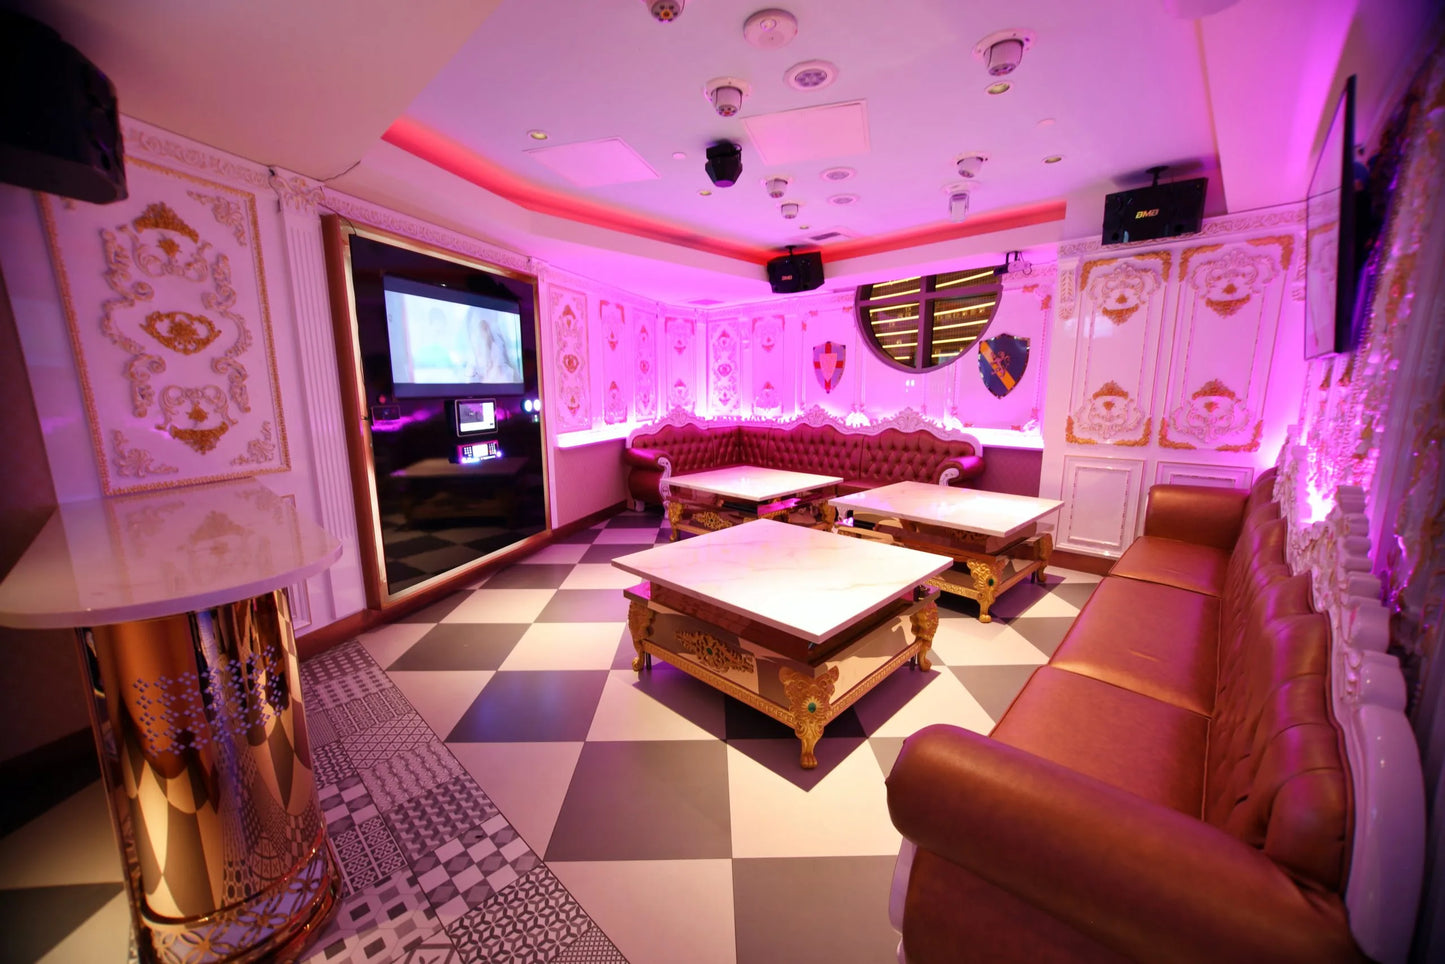 Reserve 16 to 30 Guest VIP Party Suite (Deposit)